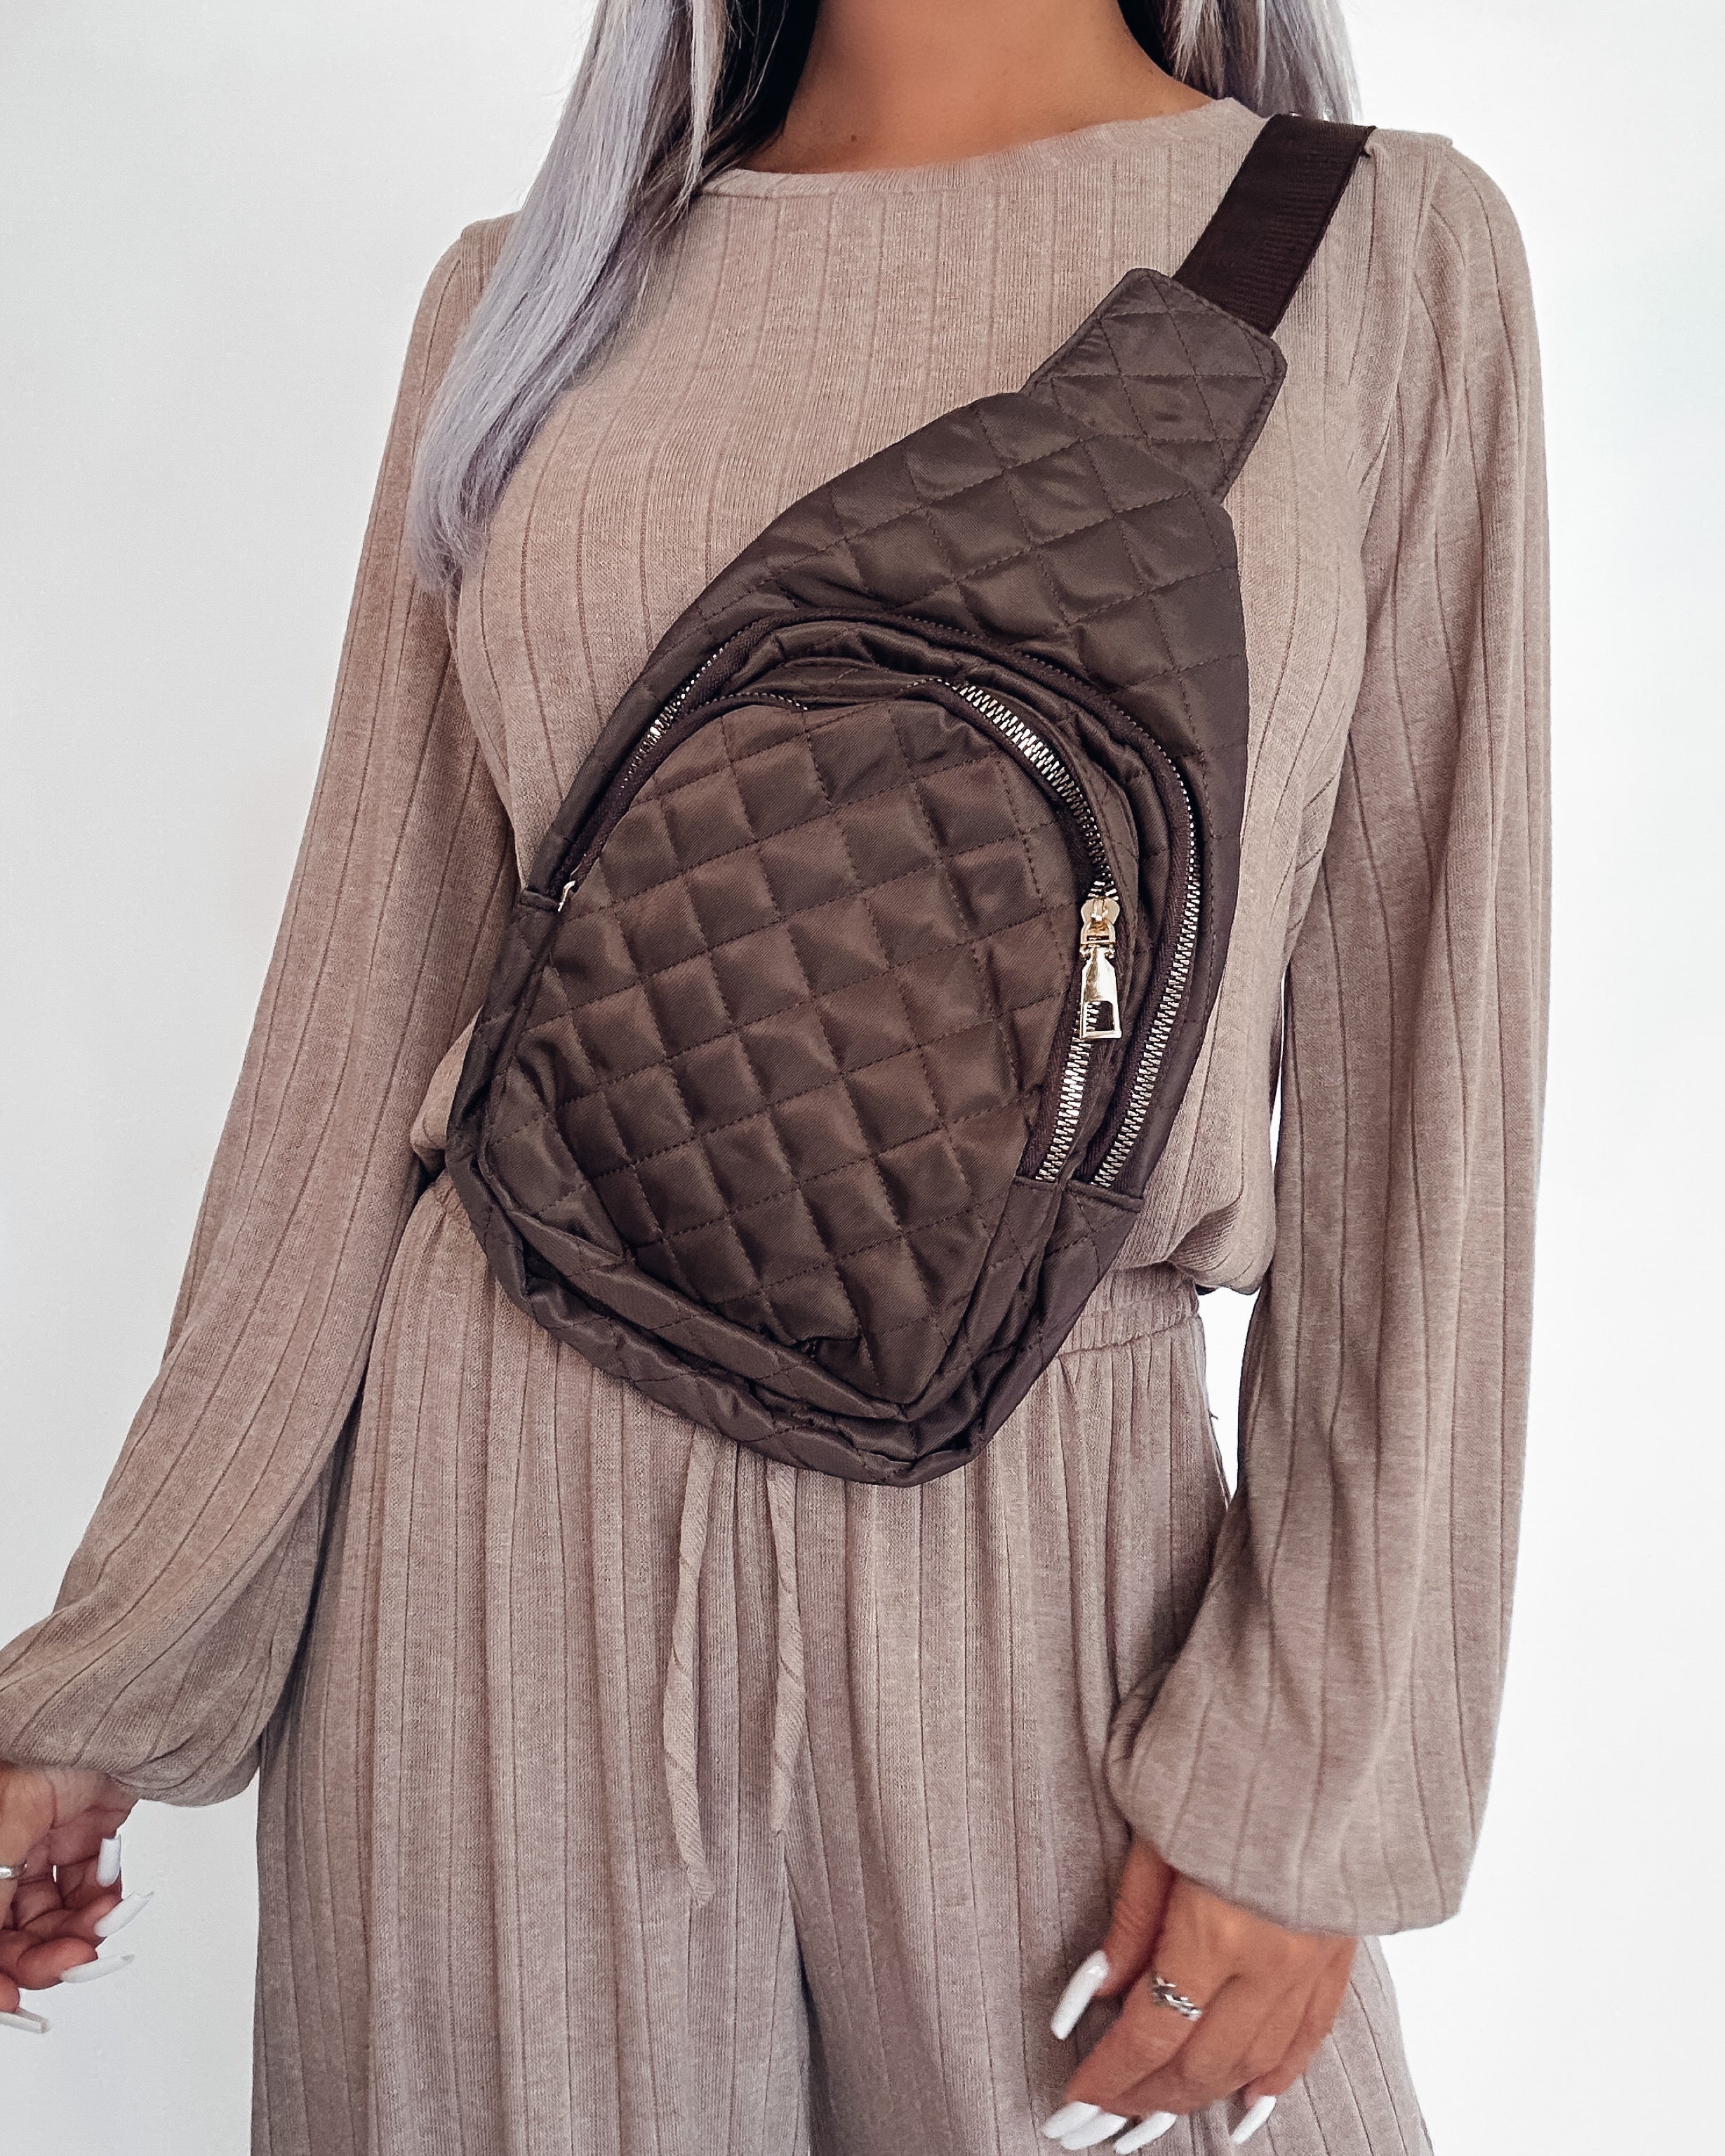 On-the-Go Chic Sling Bag - Brown